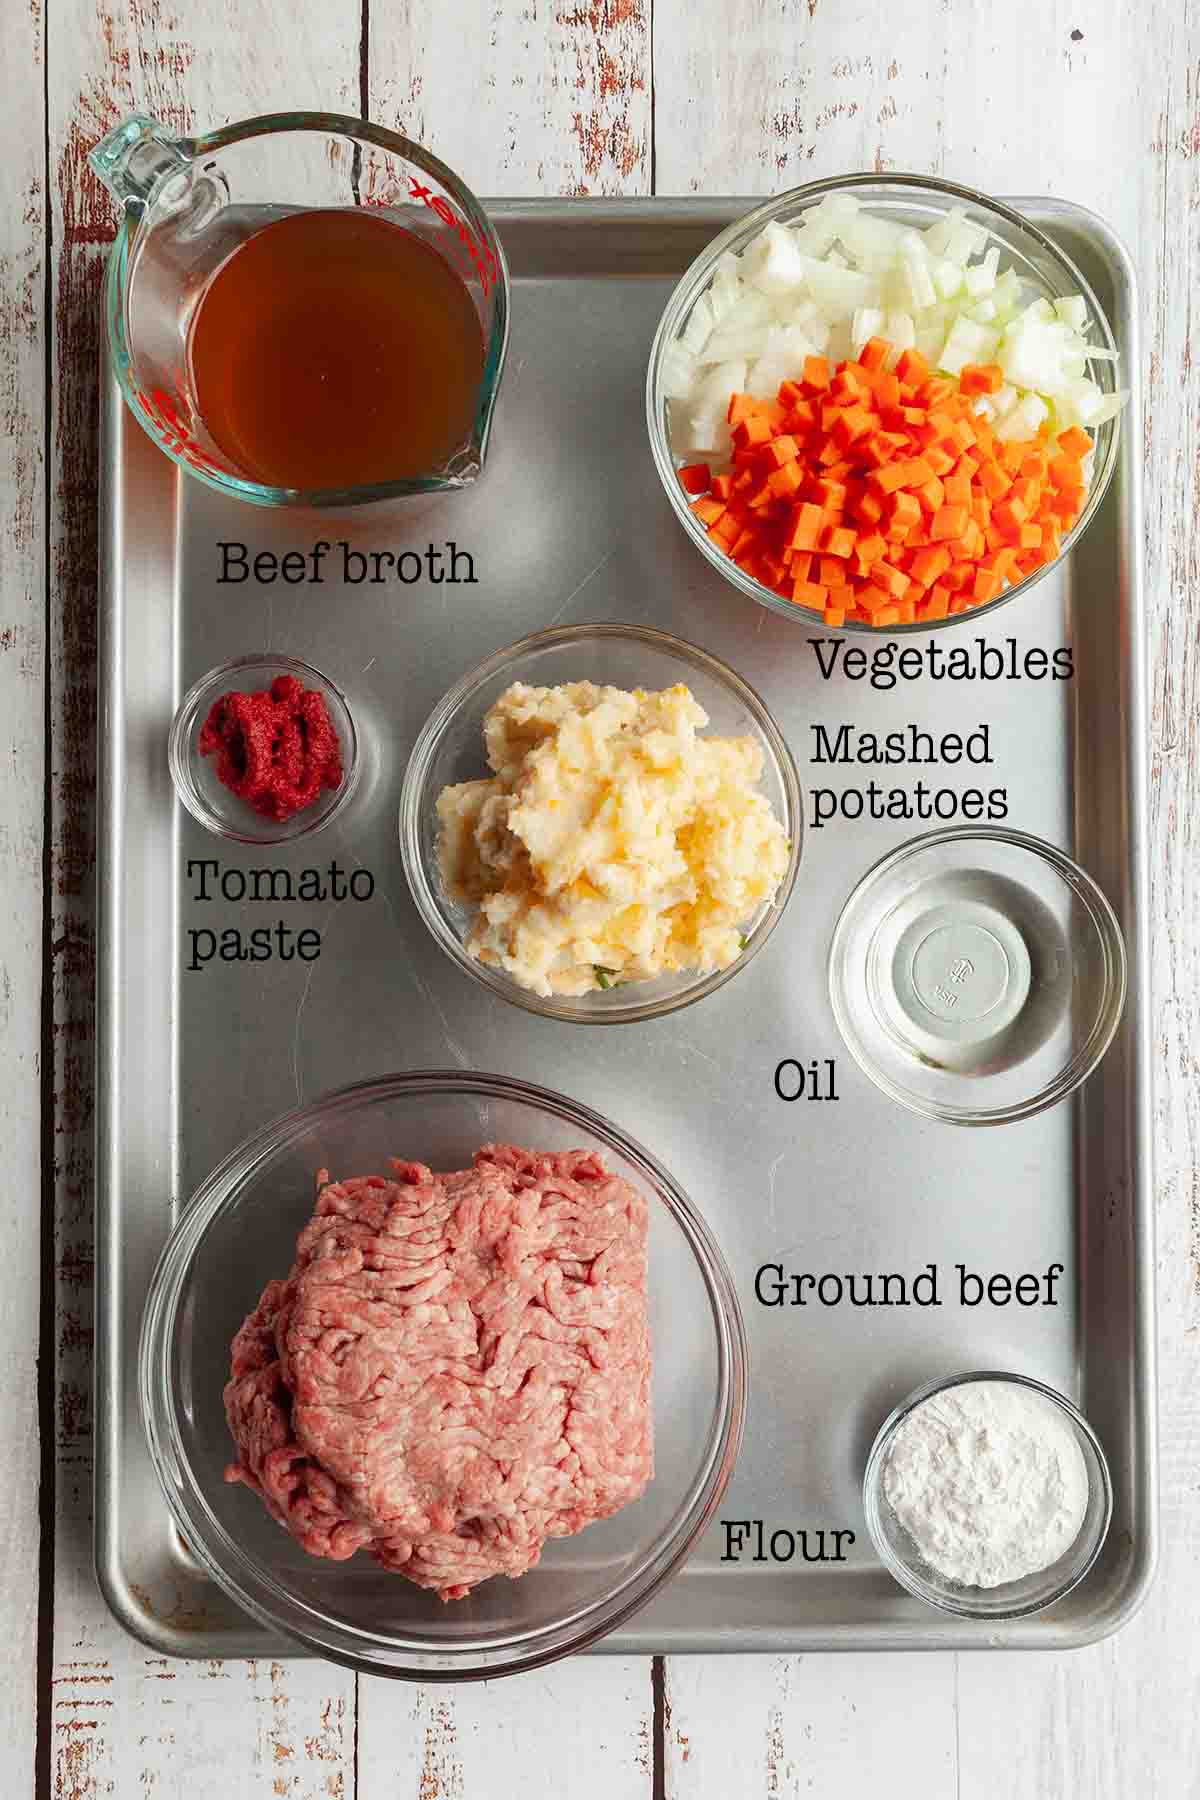 Ingredients for Dutch oven shepherd's pie--beef, vegetables, broth, tomato paste, oil, flour, and mashed potatoes.